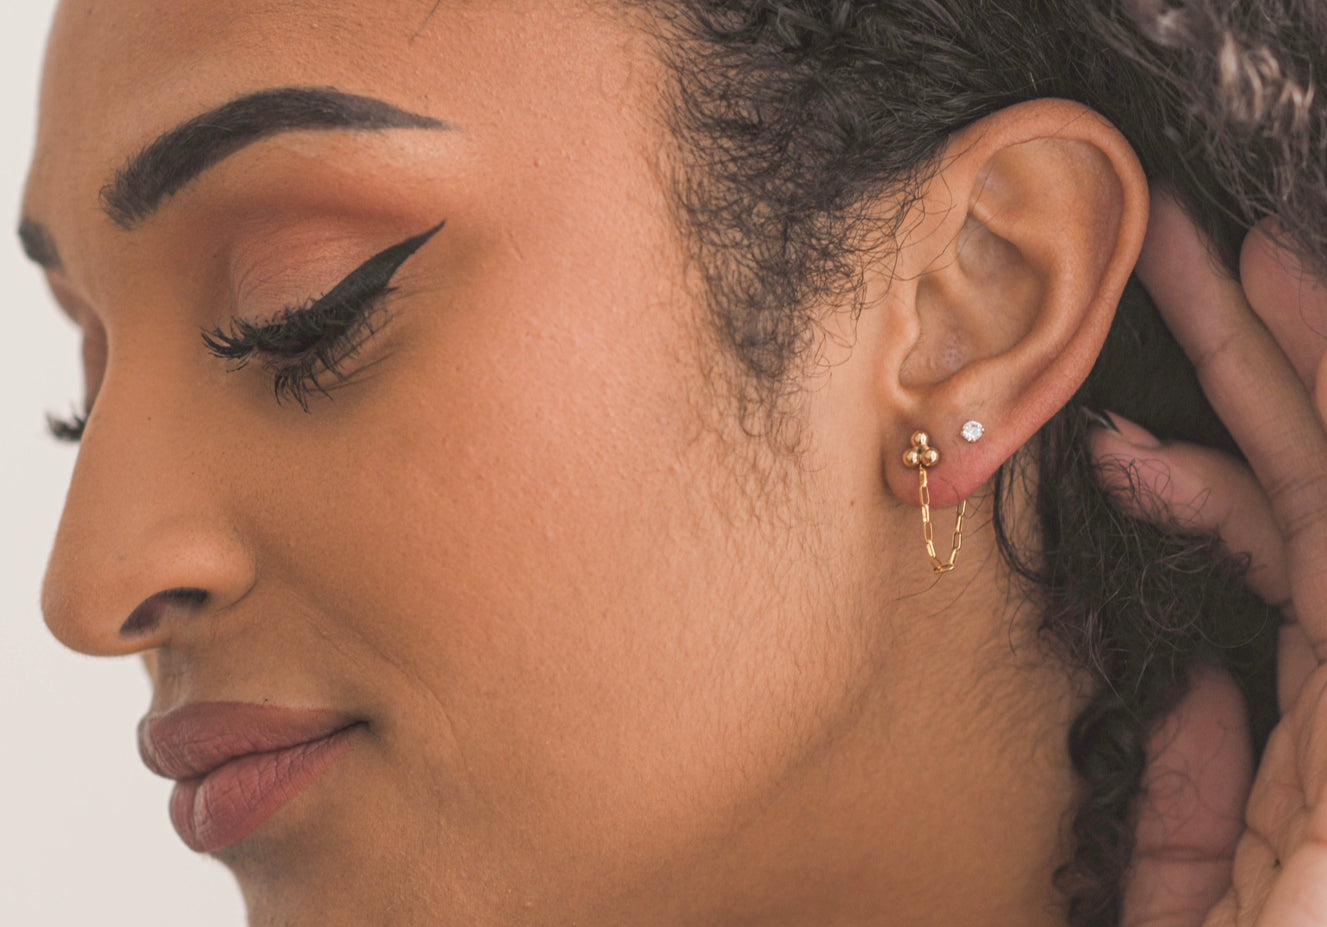 Amina Loop Connector // Ear Stack Collection